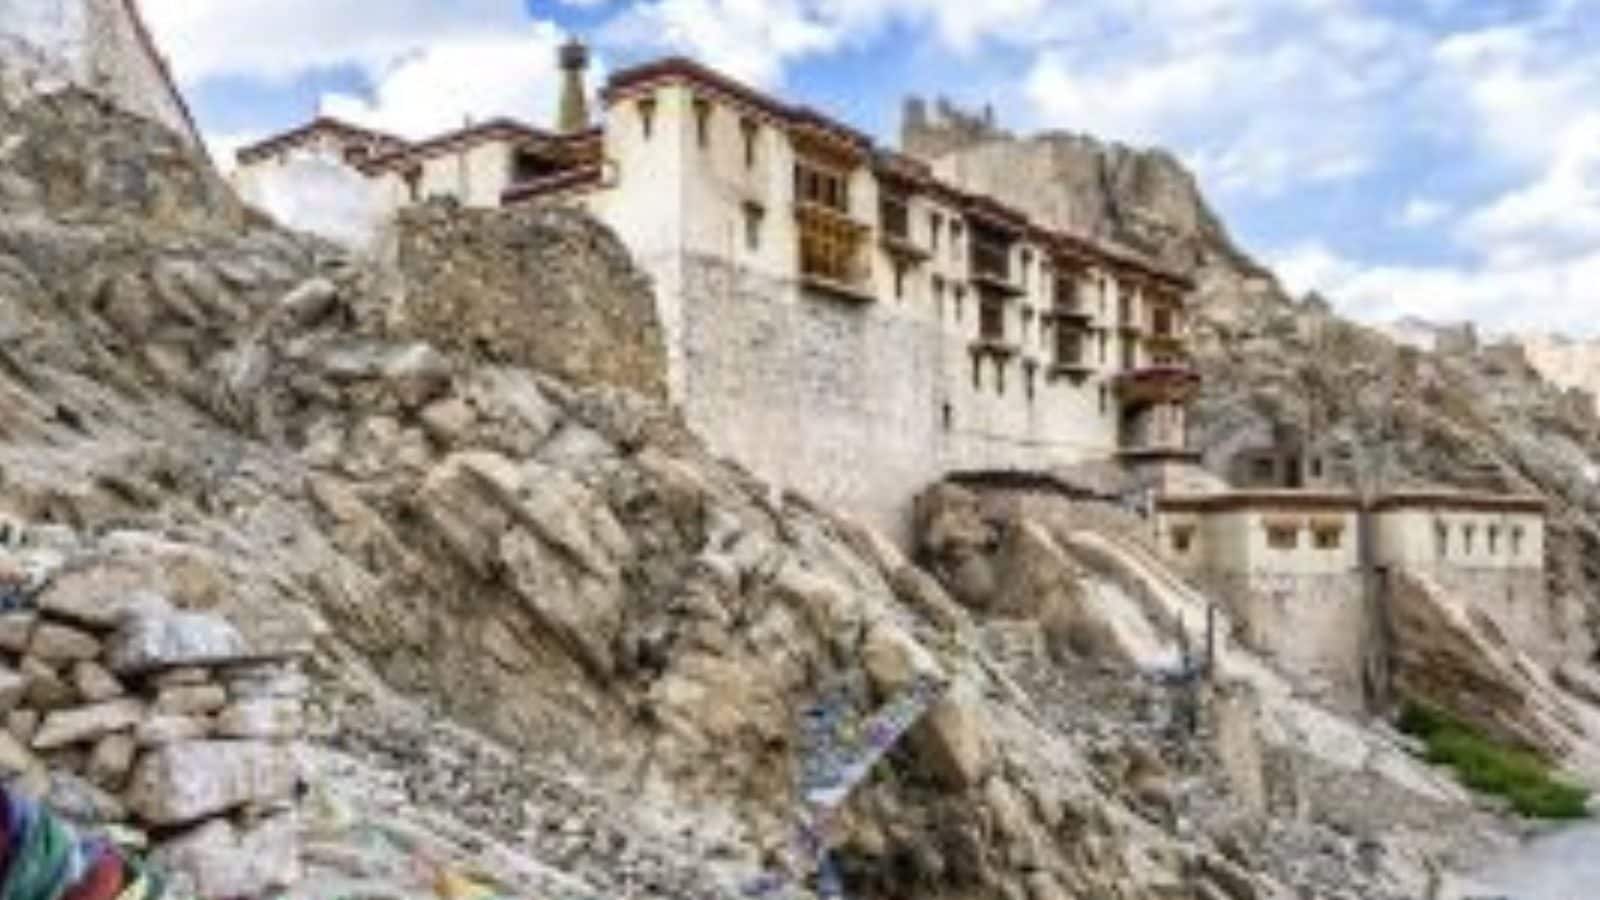 Ladakh Council Head Asks Leh Admin to Compensate Farmer Whose 22 Yaks Were ‘Stolen’ by Two Chinese Women Ne